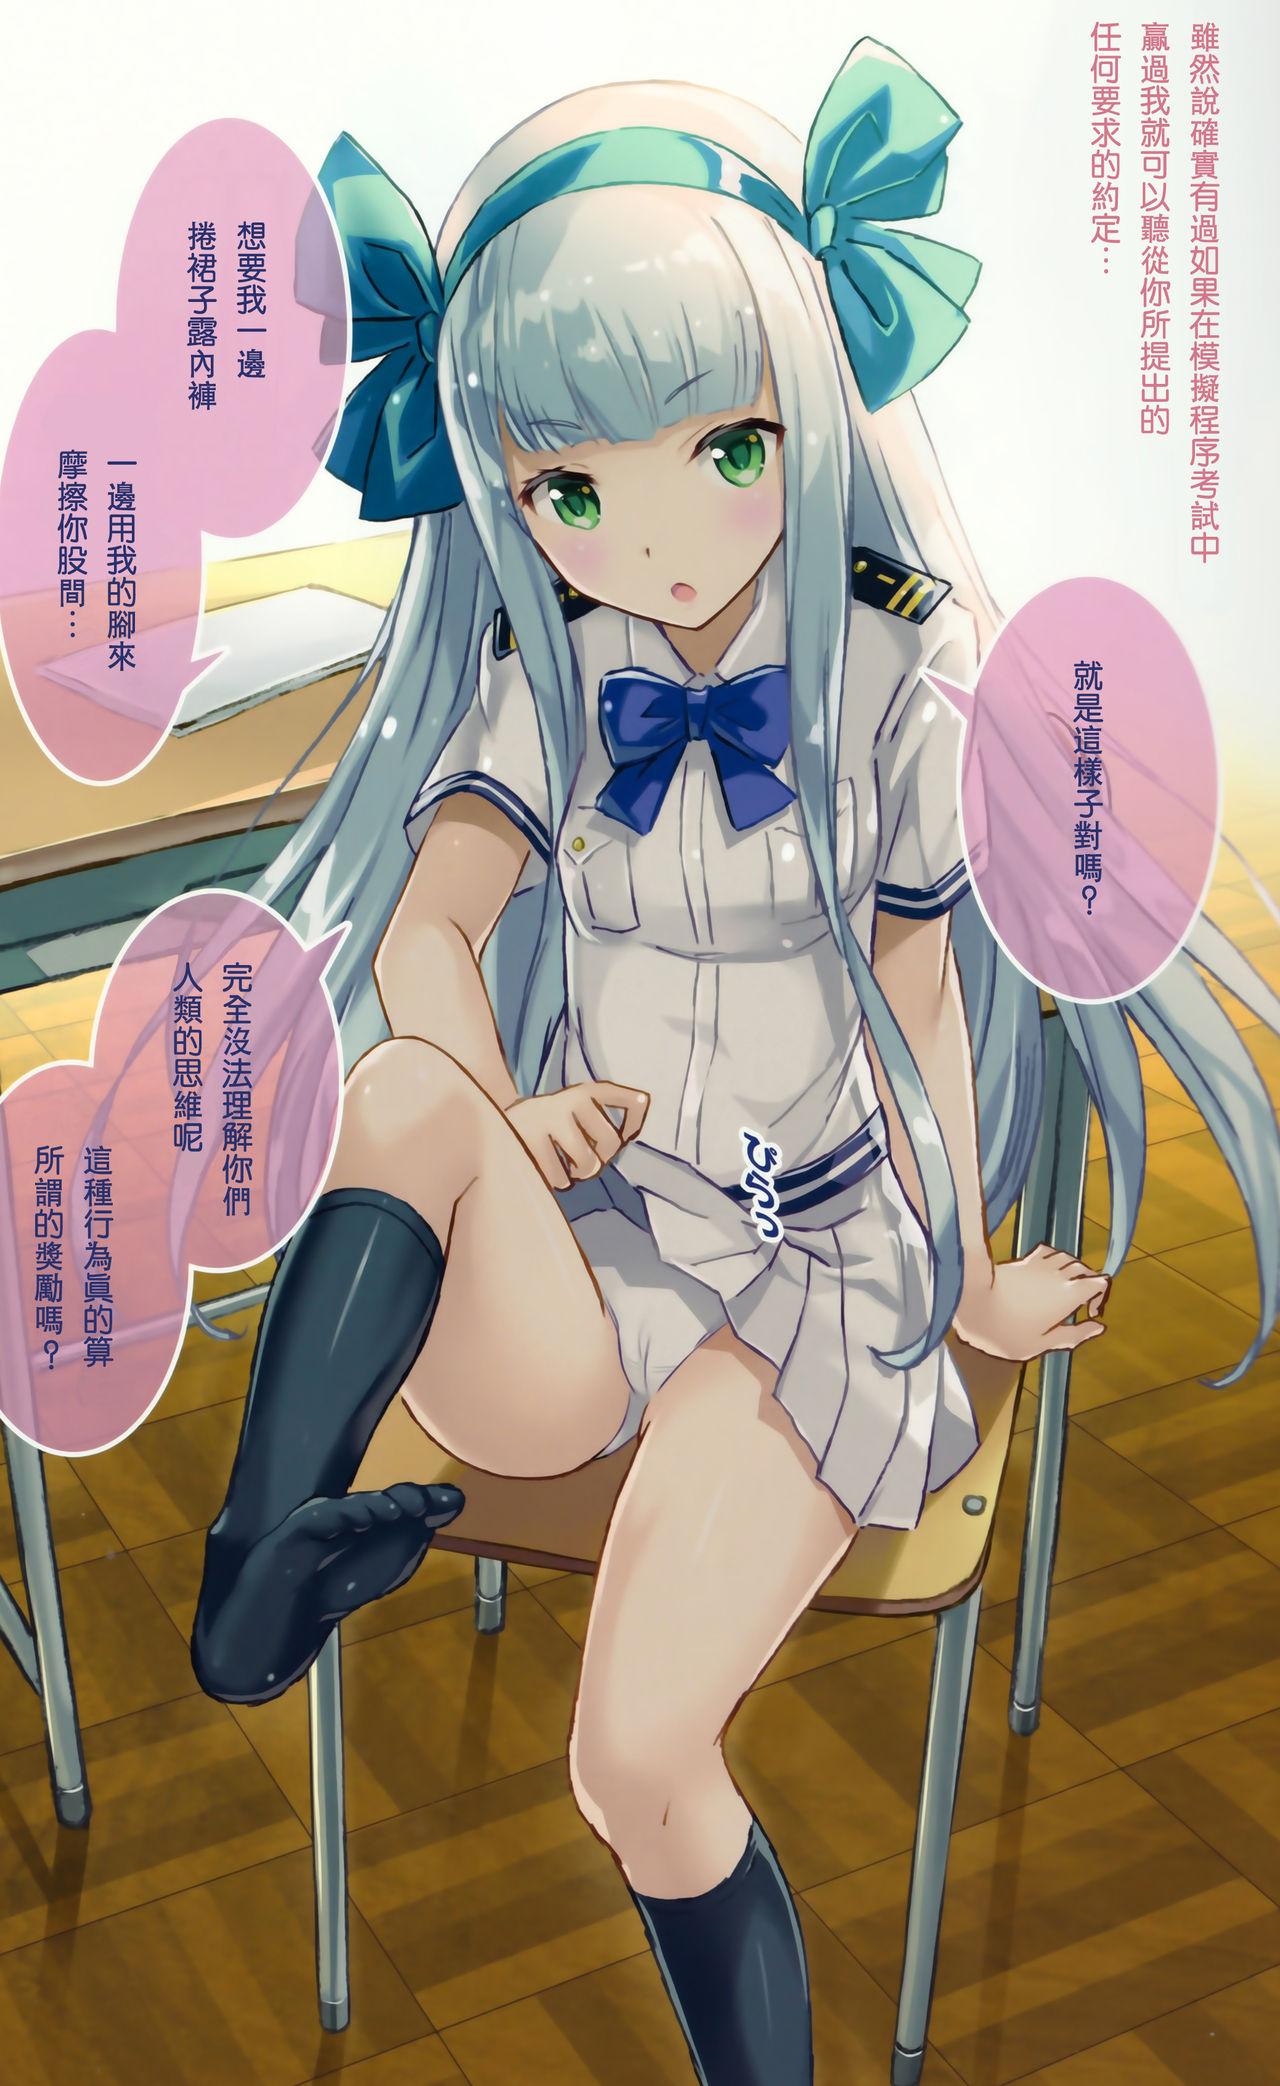 Pure 18 TAKAO OF BLUE STEEL 06 - Arpeggio of blue steel Mujer - Page 7